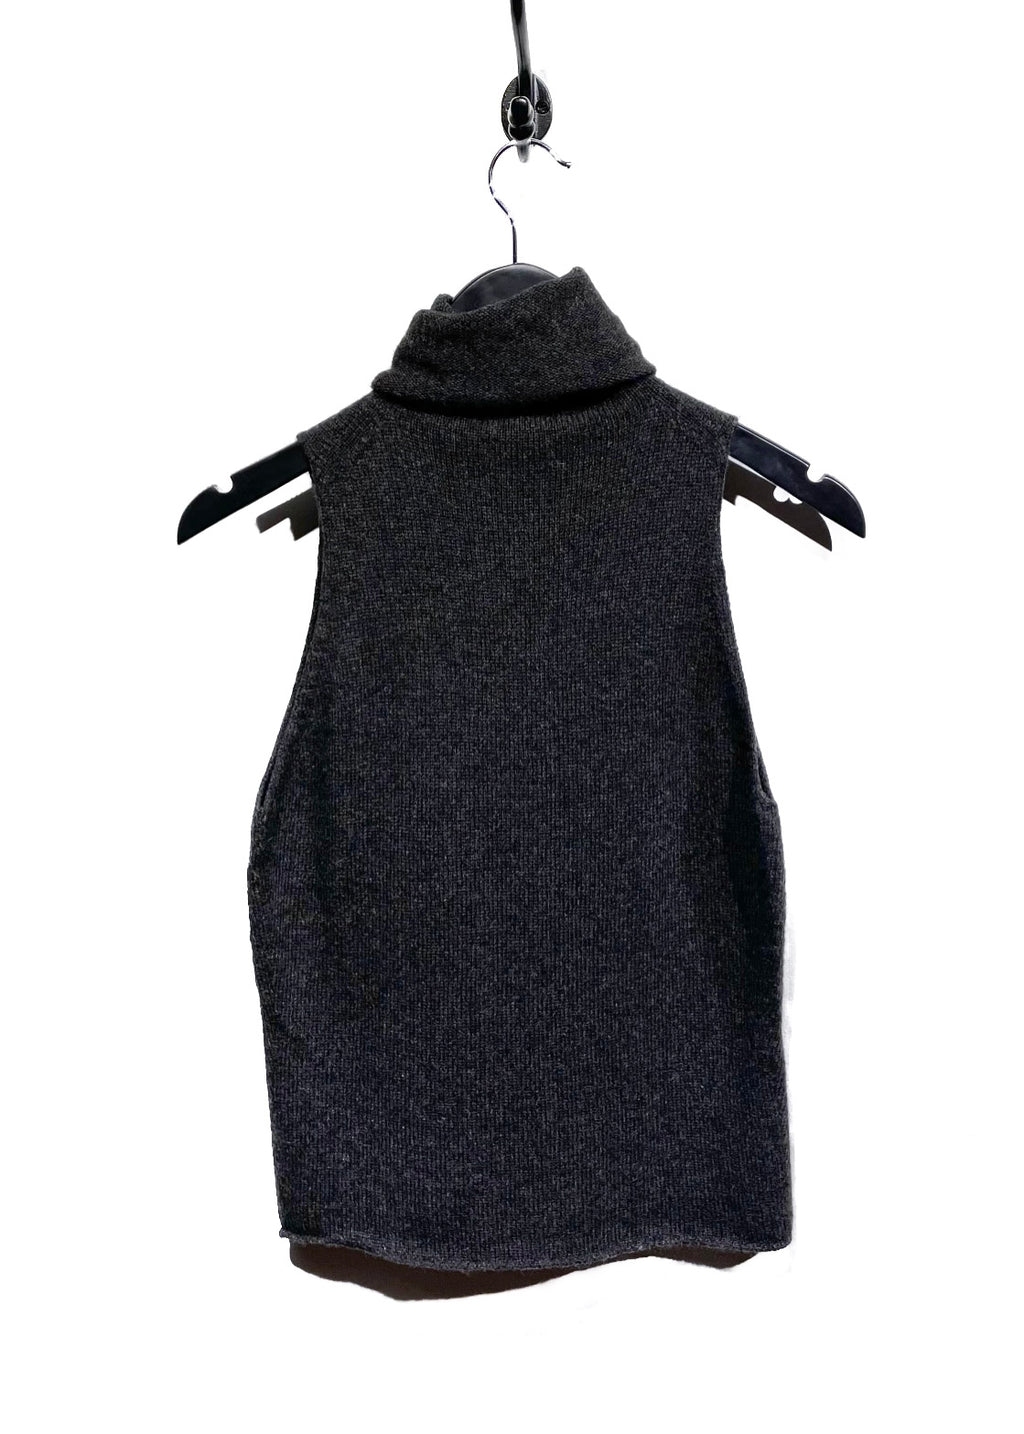 Gucci Charcoal Wool Cashmere Turtleneck